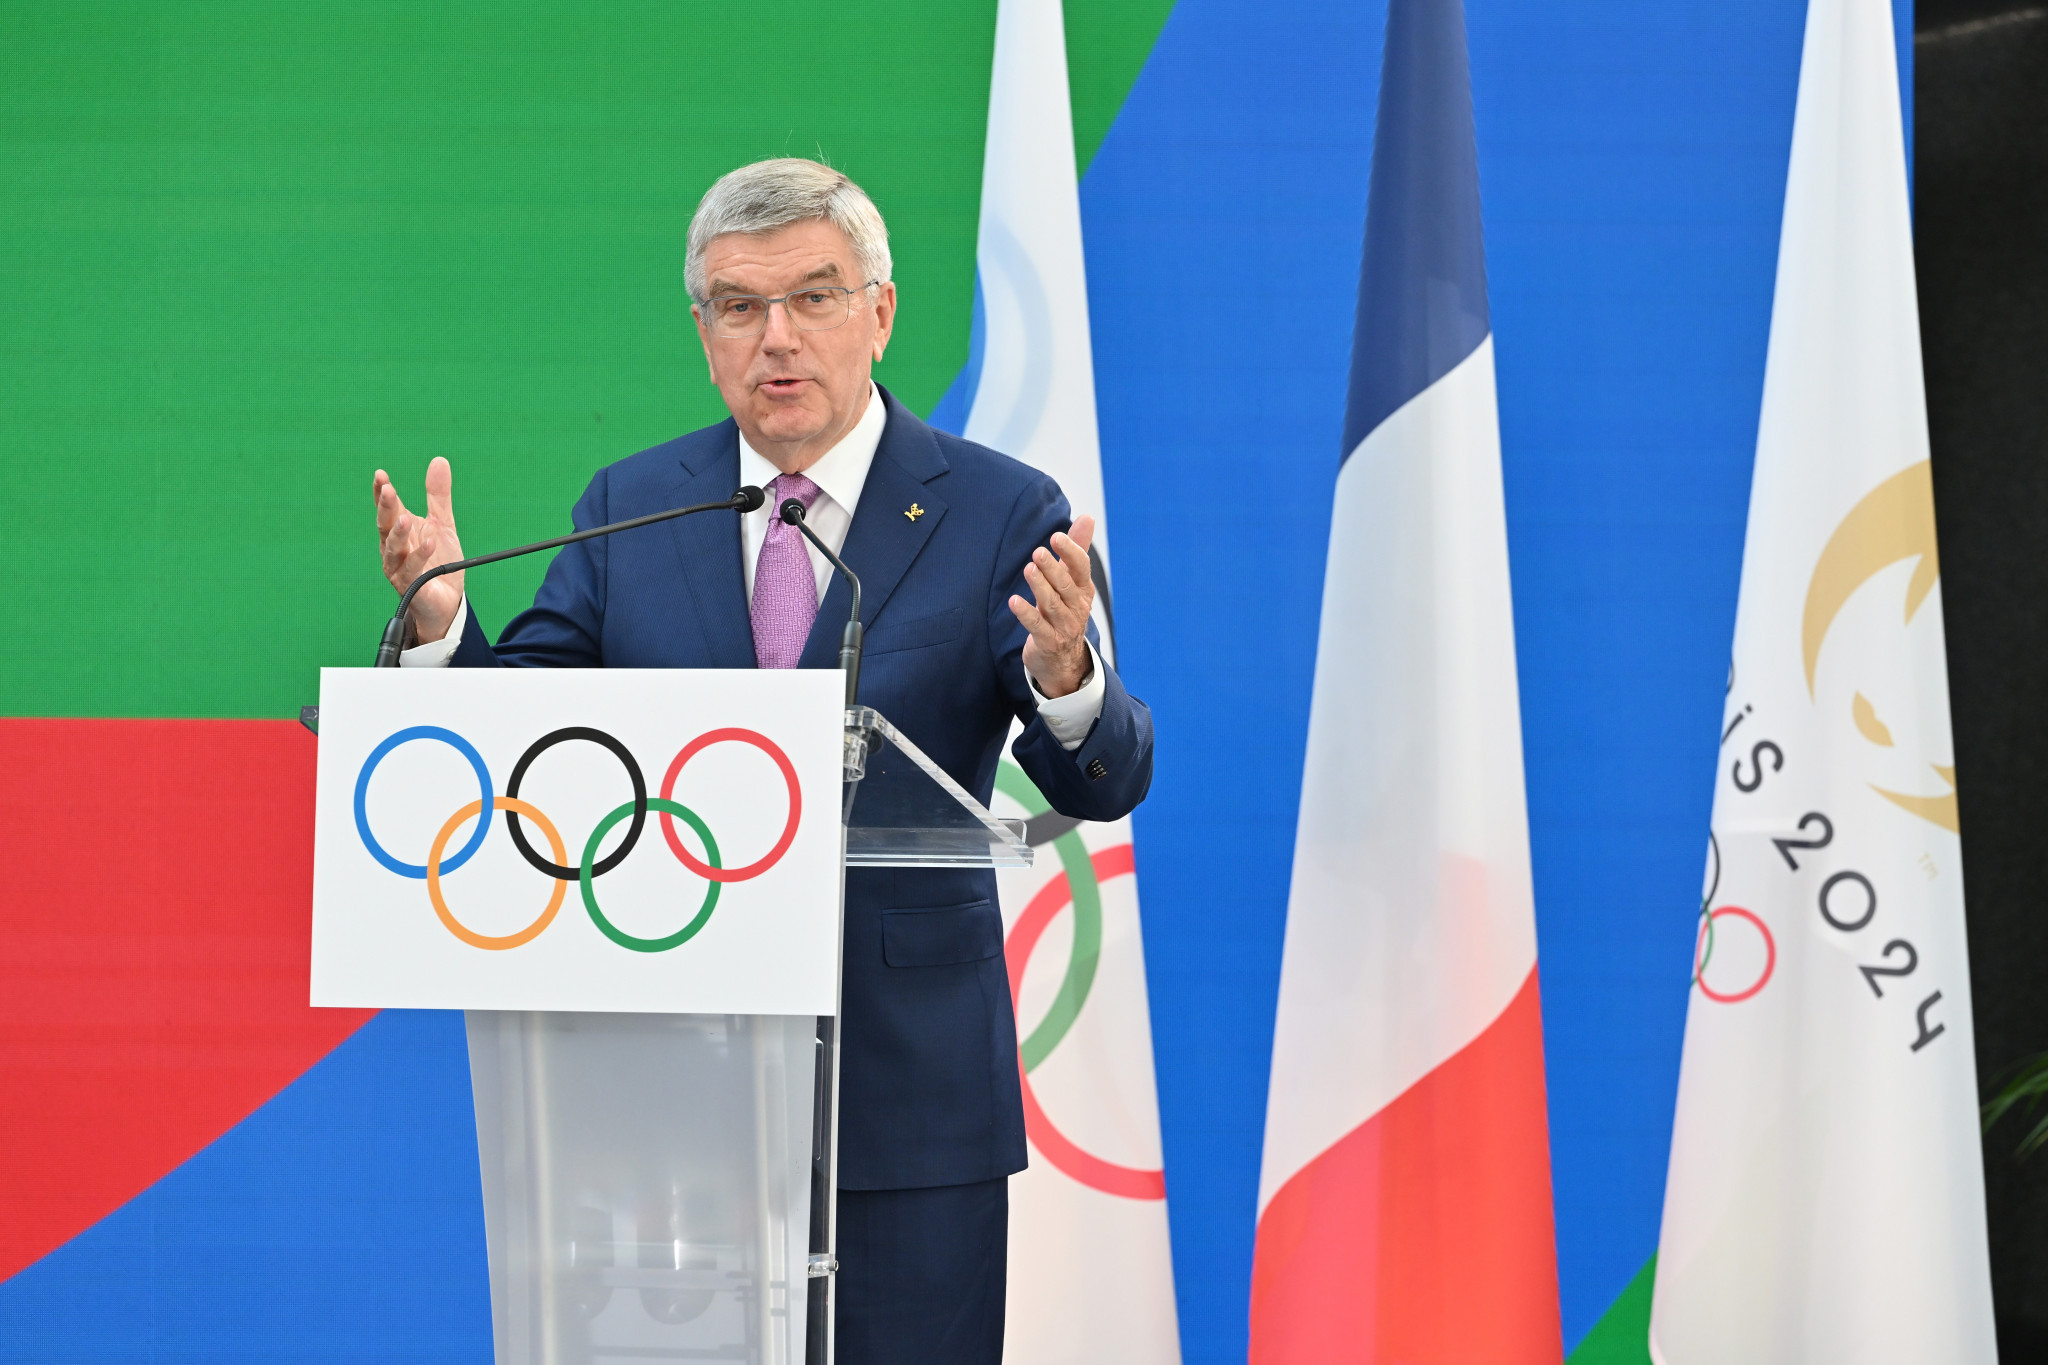 Bach tells International Athletes Forum he hopes every country can compete at Paris 2024